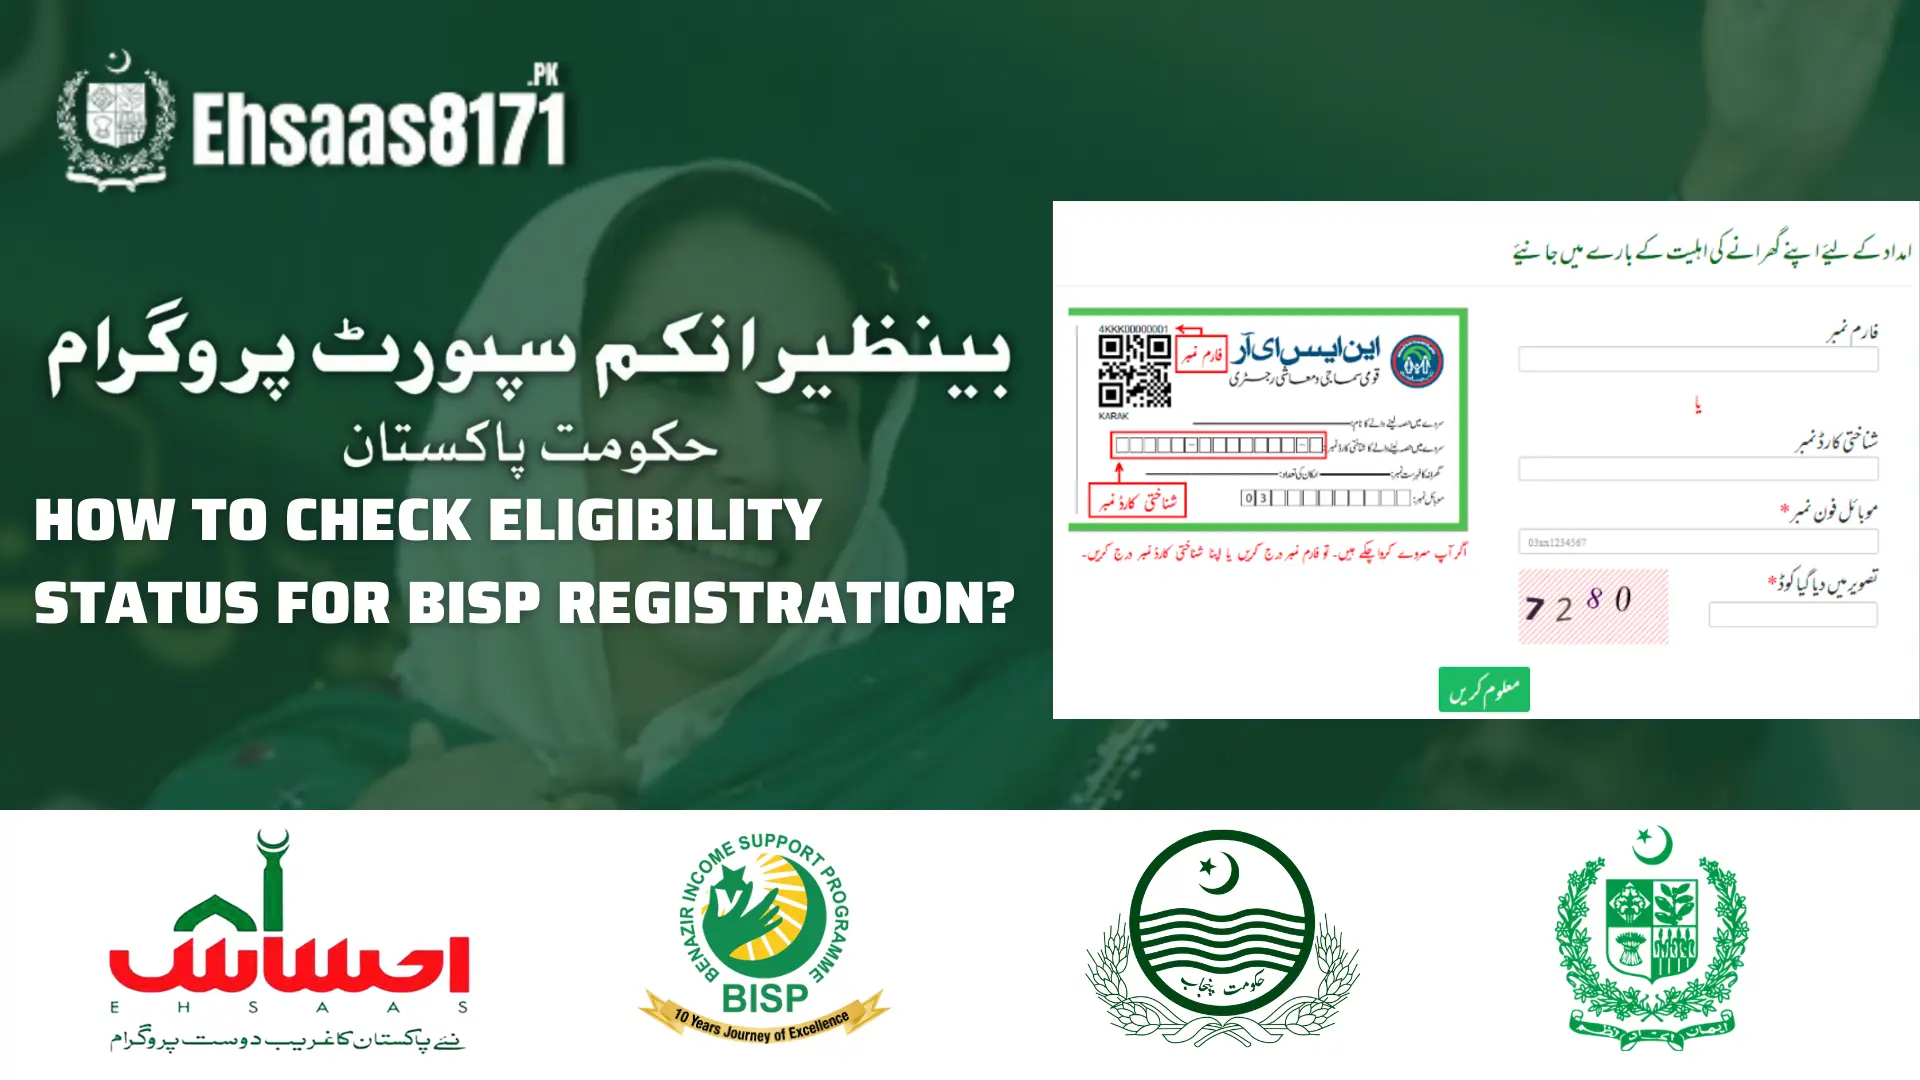 How To Check Eligibility Status for BISP Registration?